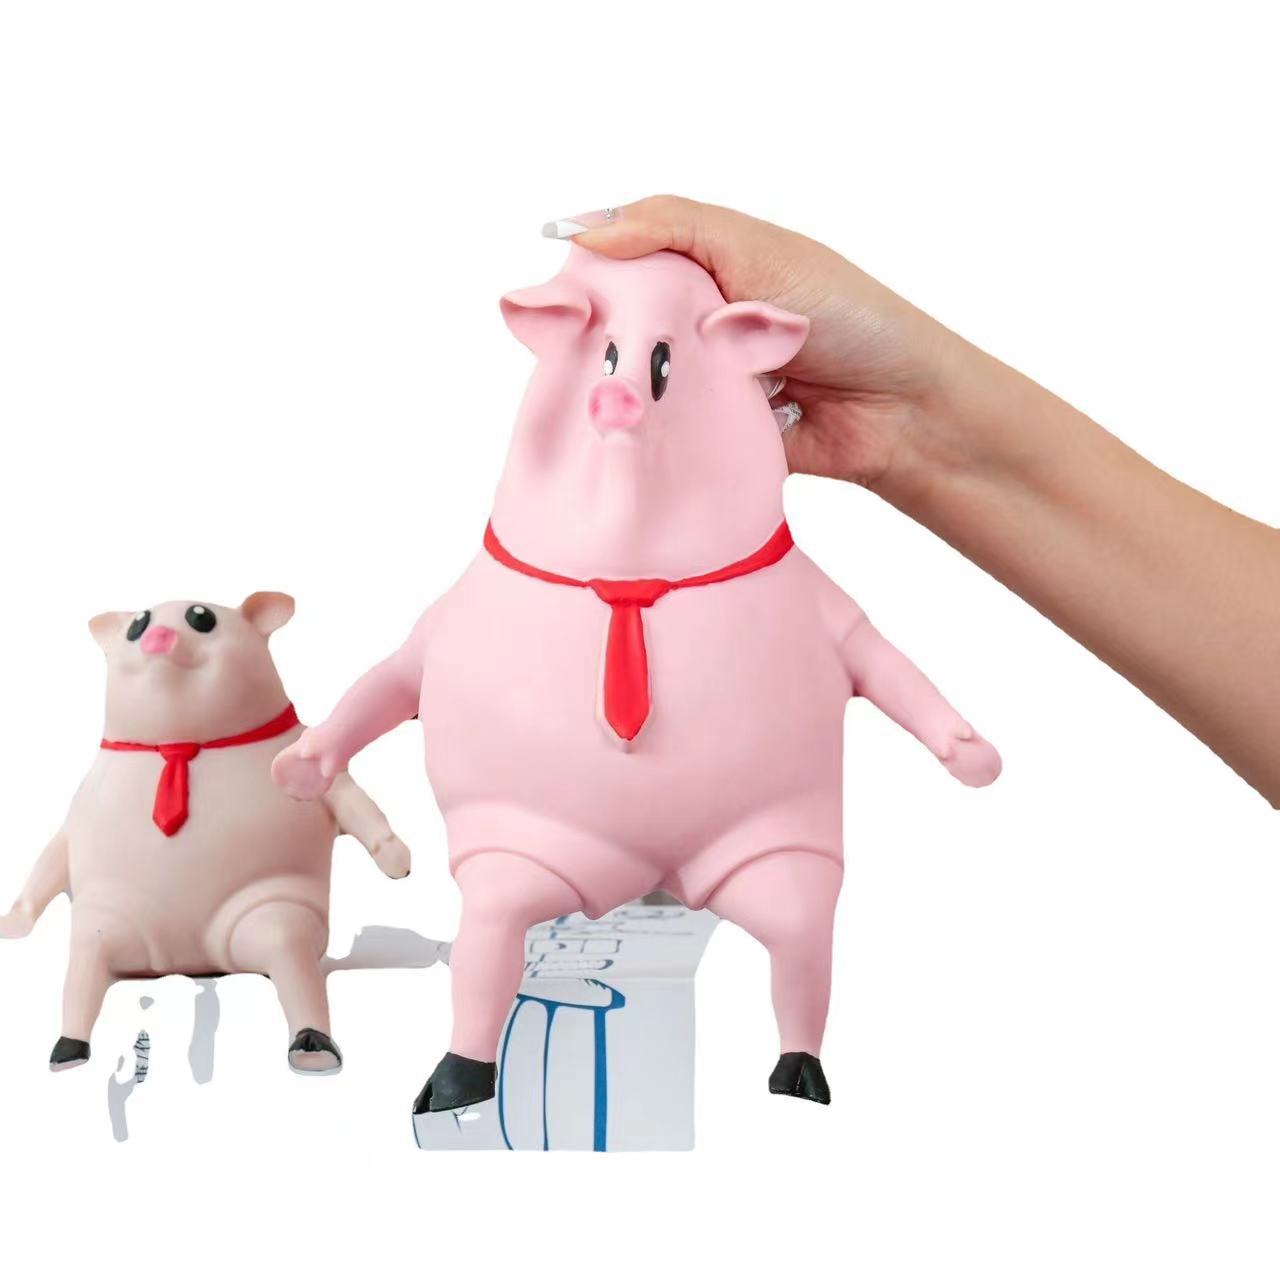 Piggy Squeeze Toys Pink Pigs Antistress Toy Cute Squeeze Animals Lovely Piggy Doll Stress Relief Toy Children Day For Kids Gift Gifts